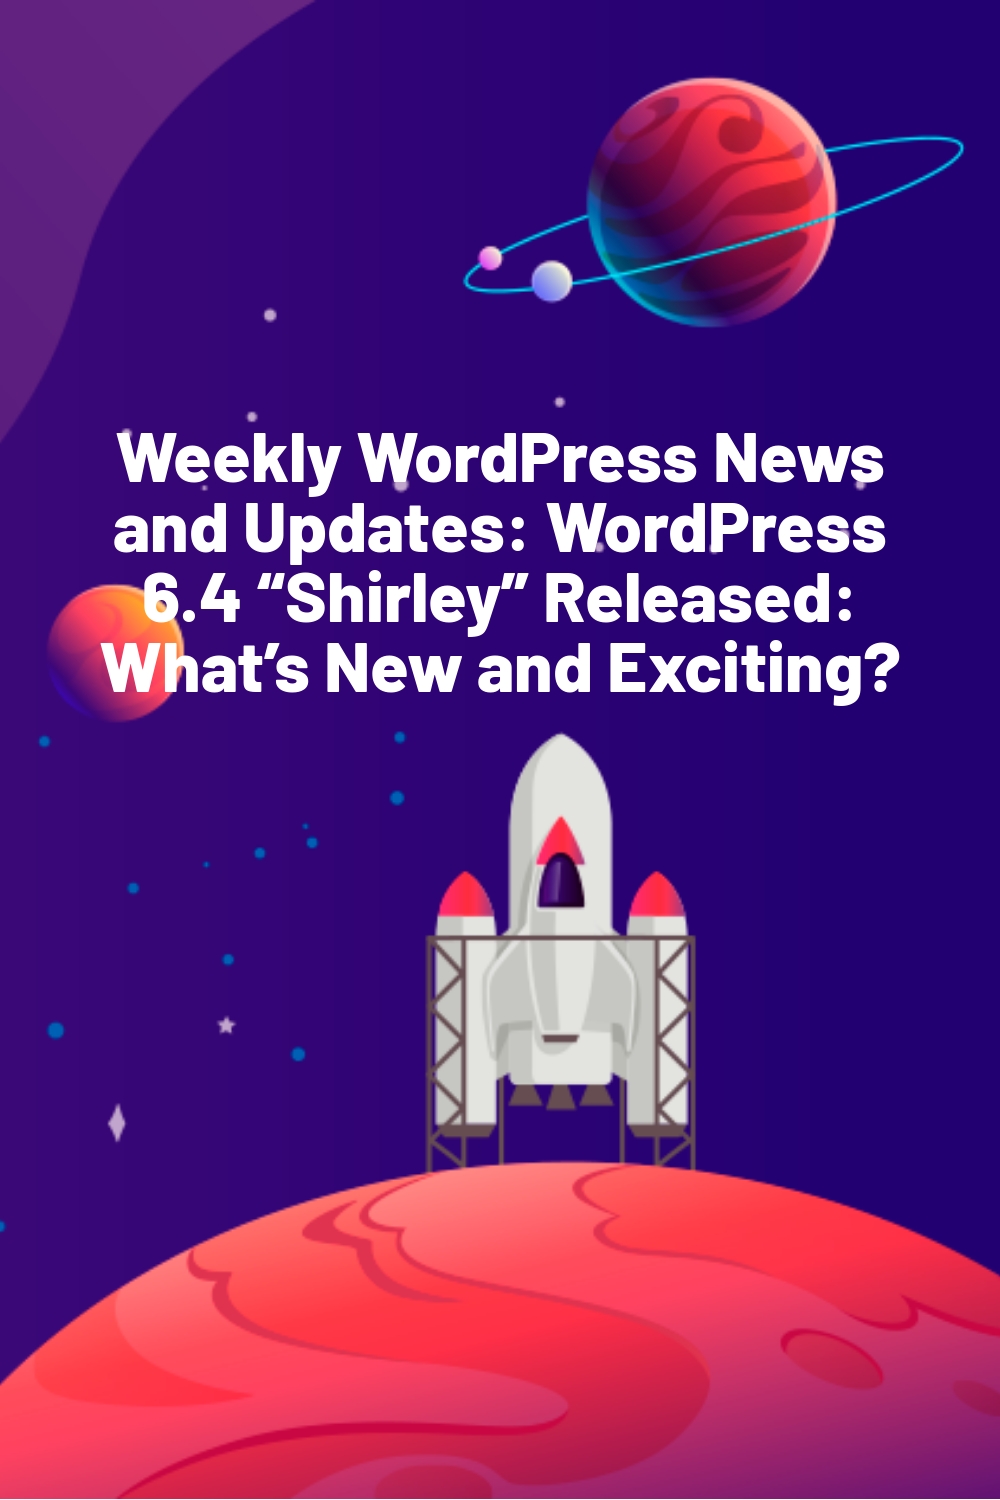 Weekly WordPress News and Updates: WordPress 6.4 “Shirley” Released: What’s New and Exciting?